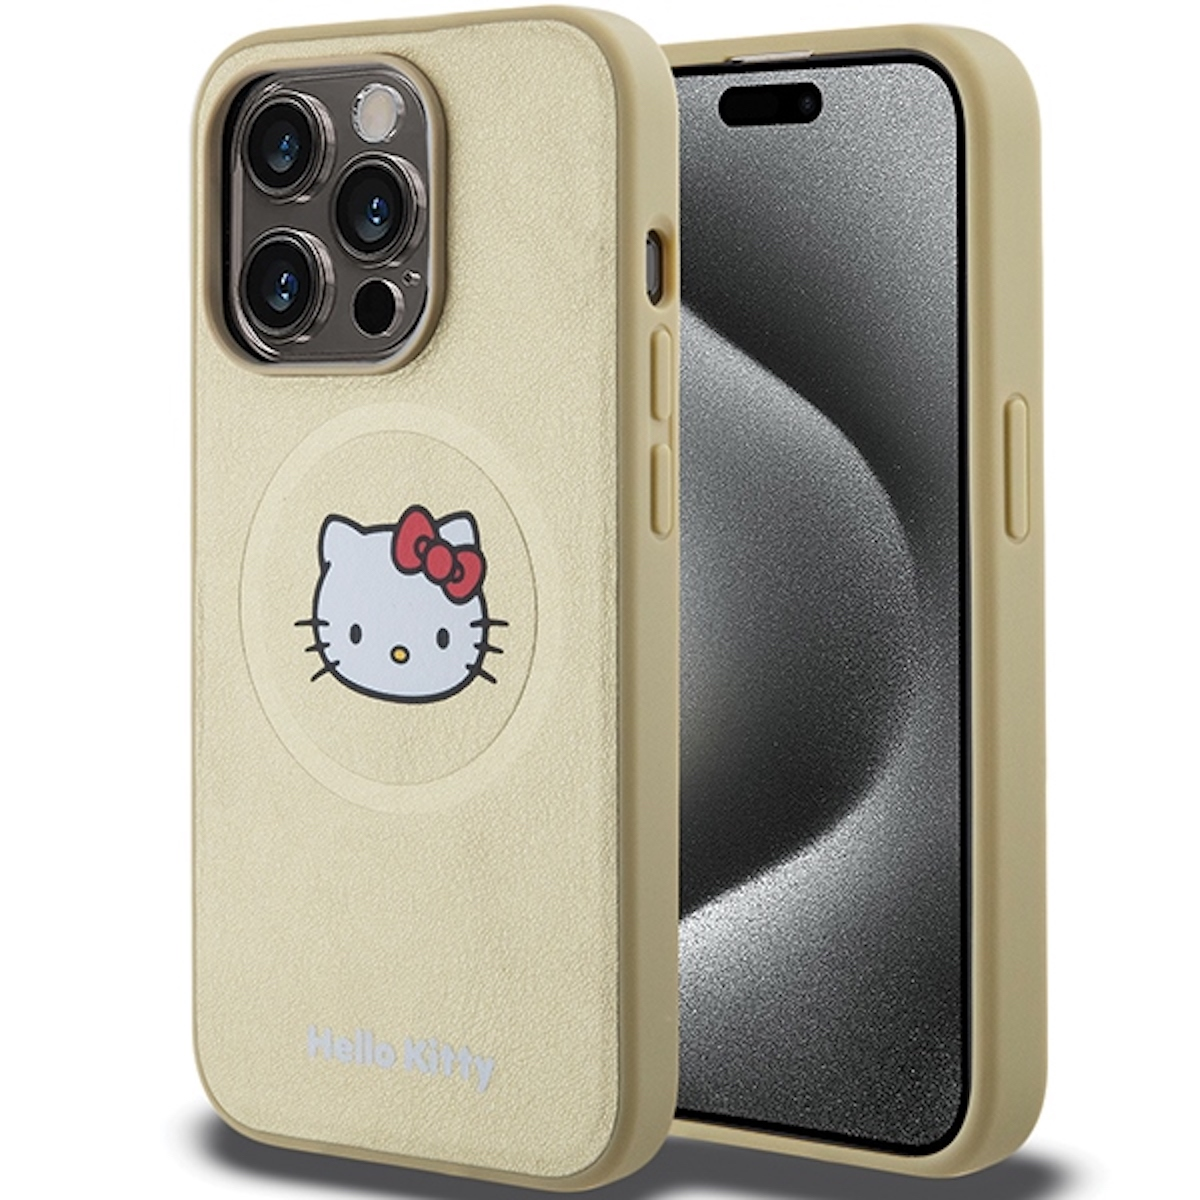 Backcover, MagSafe Gold Schutzhülle Design, HELLO CHEFMADE Kitty BY 15, Cover Leather Head KITTY iPhone Apple,